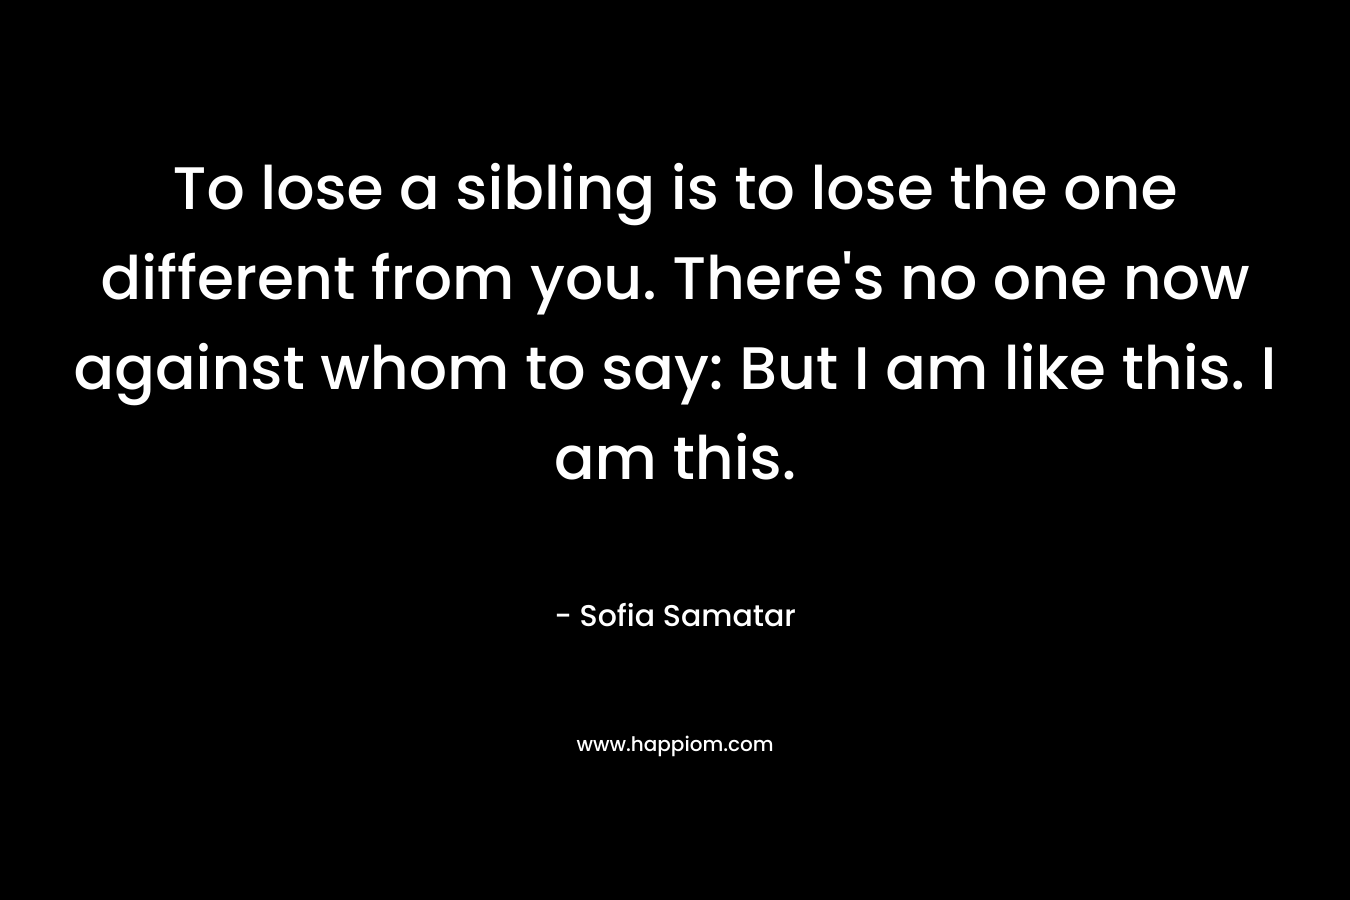 To lose a sibling is to lose the one different from you. There's no one now against whom to say: But I am like this. I am this.